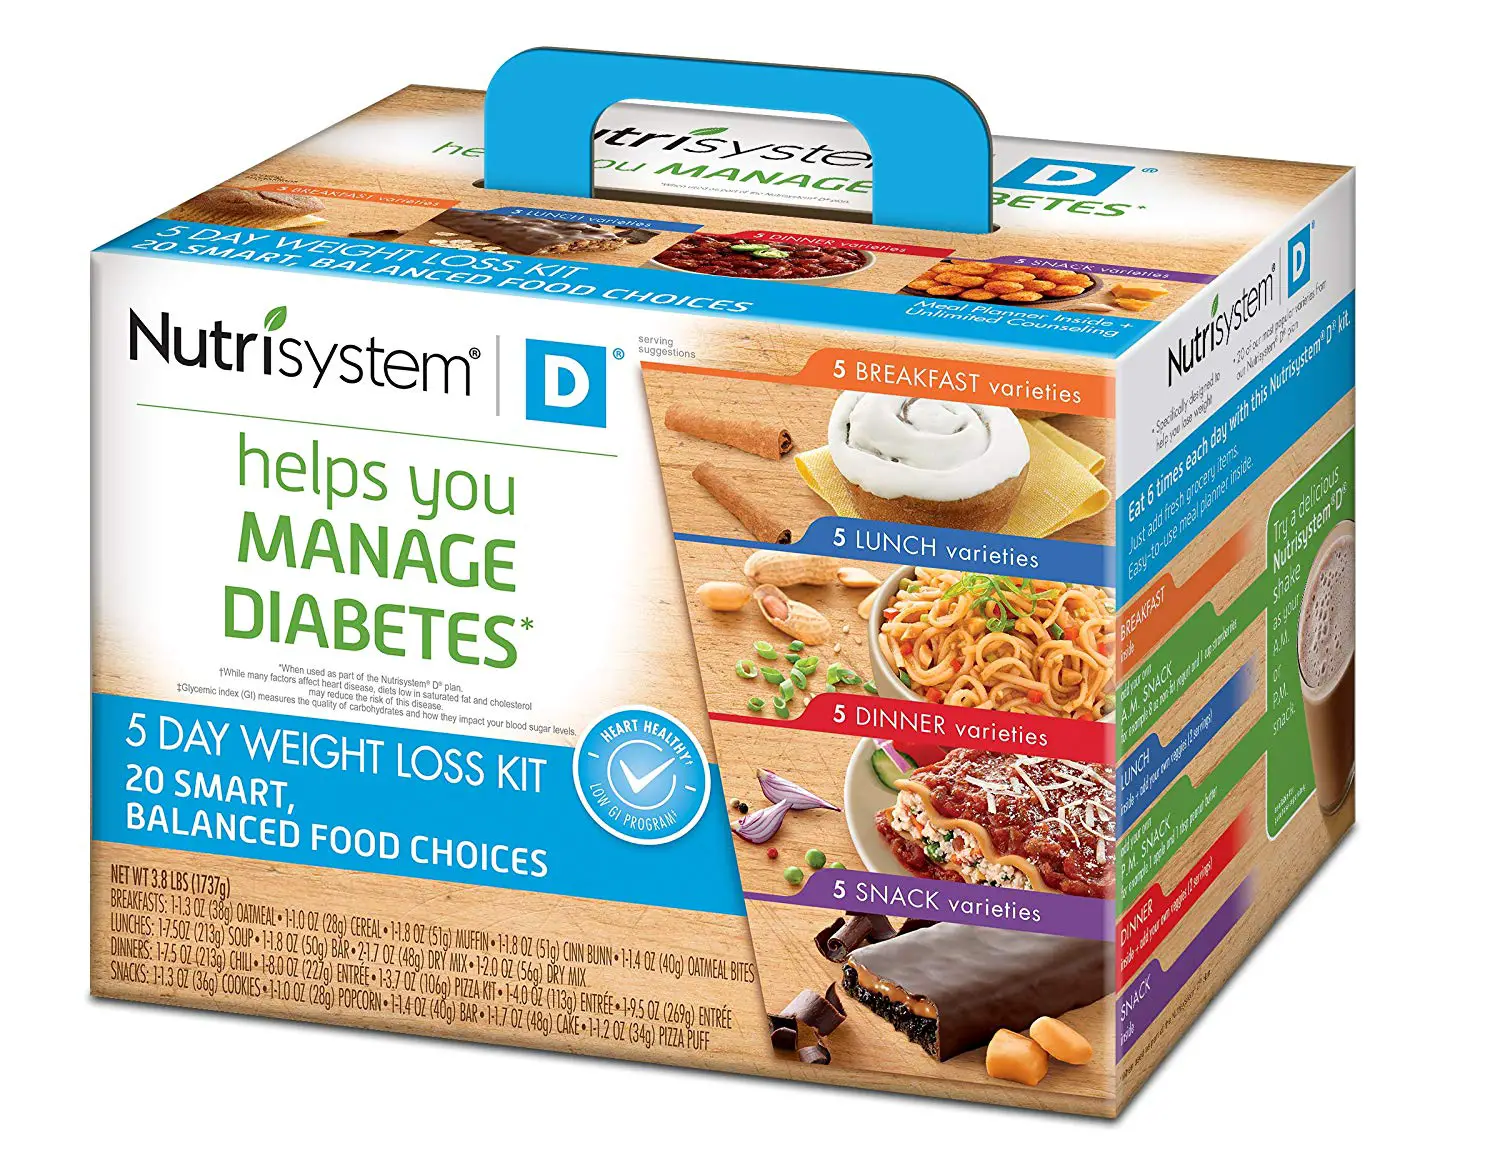 A Complete Guide On Nutrisystem Gluten